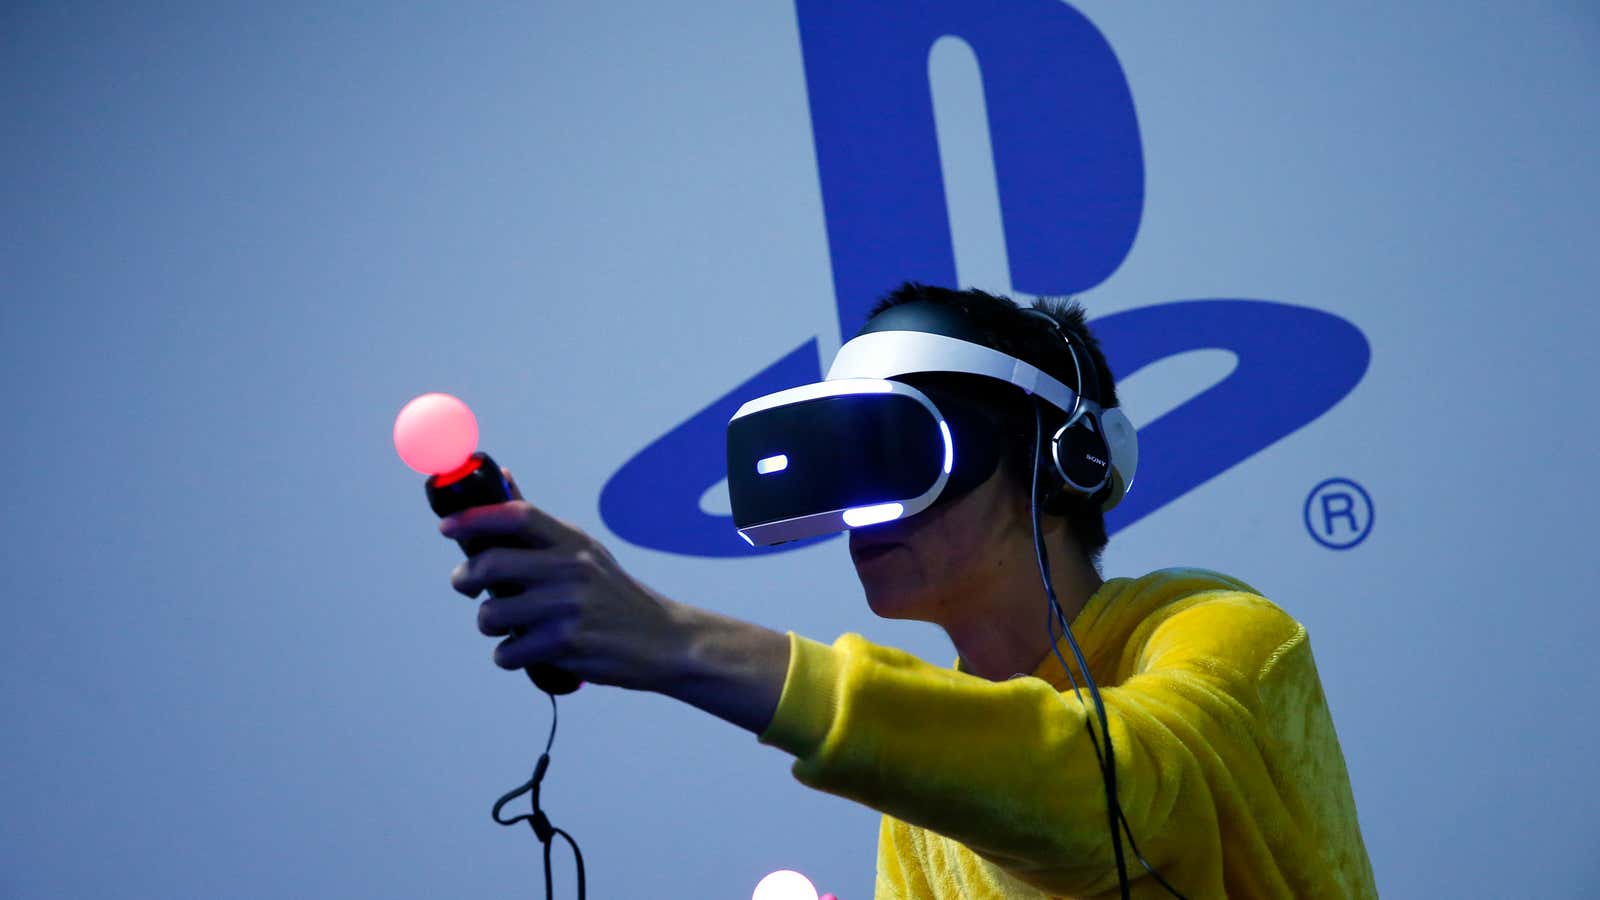 A person plays a game on the original PlayStation VR headset at Paris Games Week in 2015.